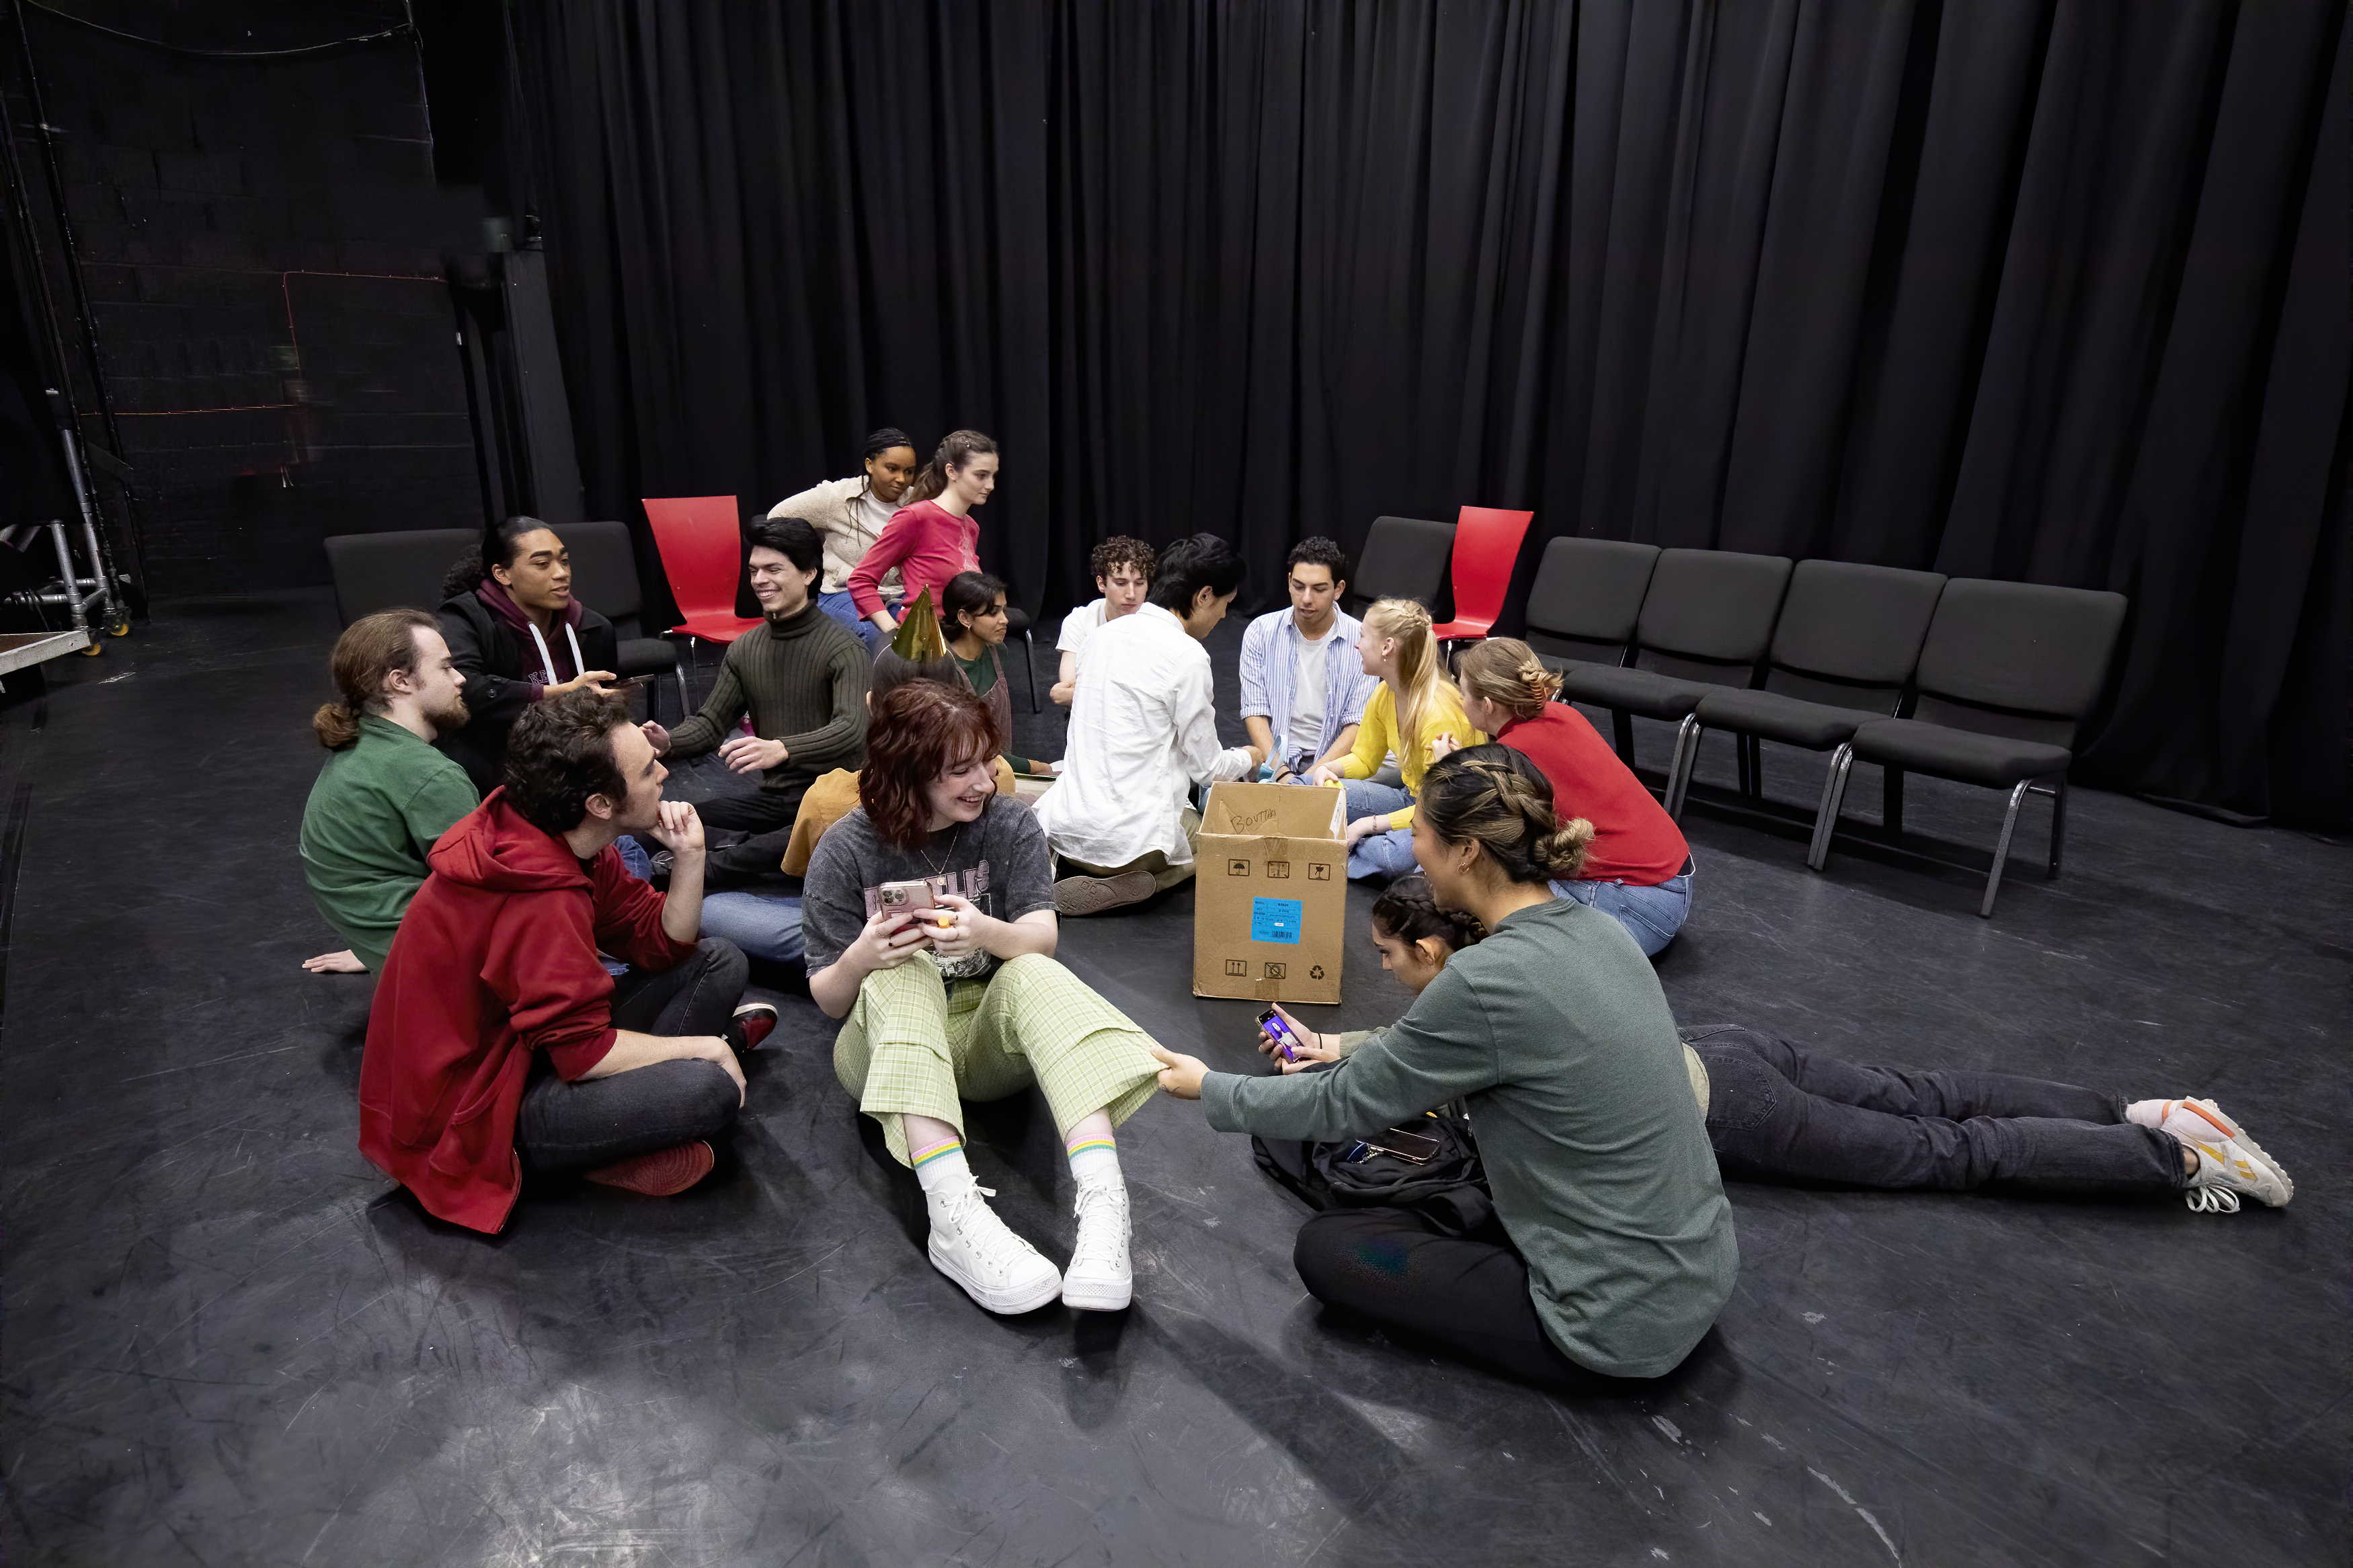 Fall 2022 students seated in a circle on the ground in a black box theatre